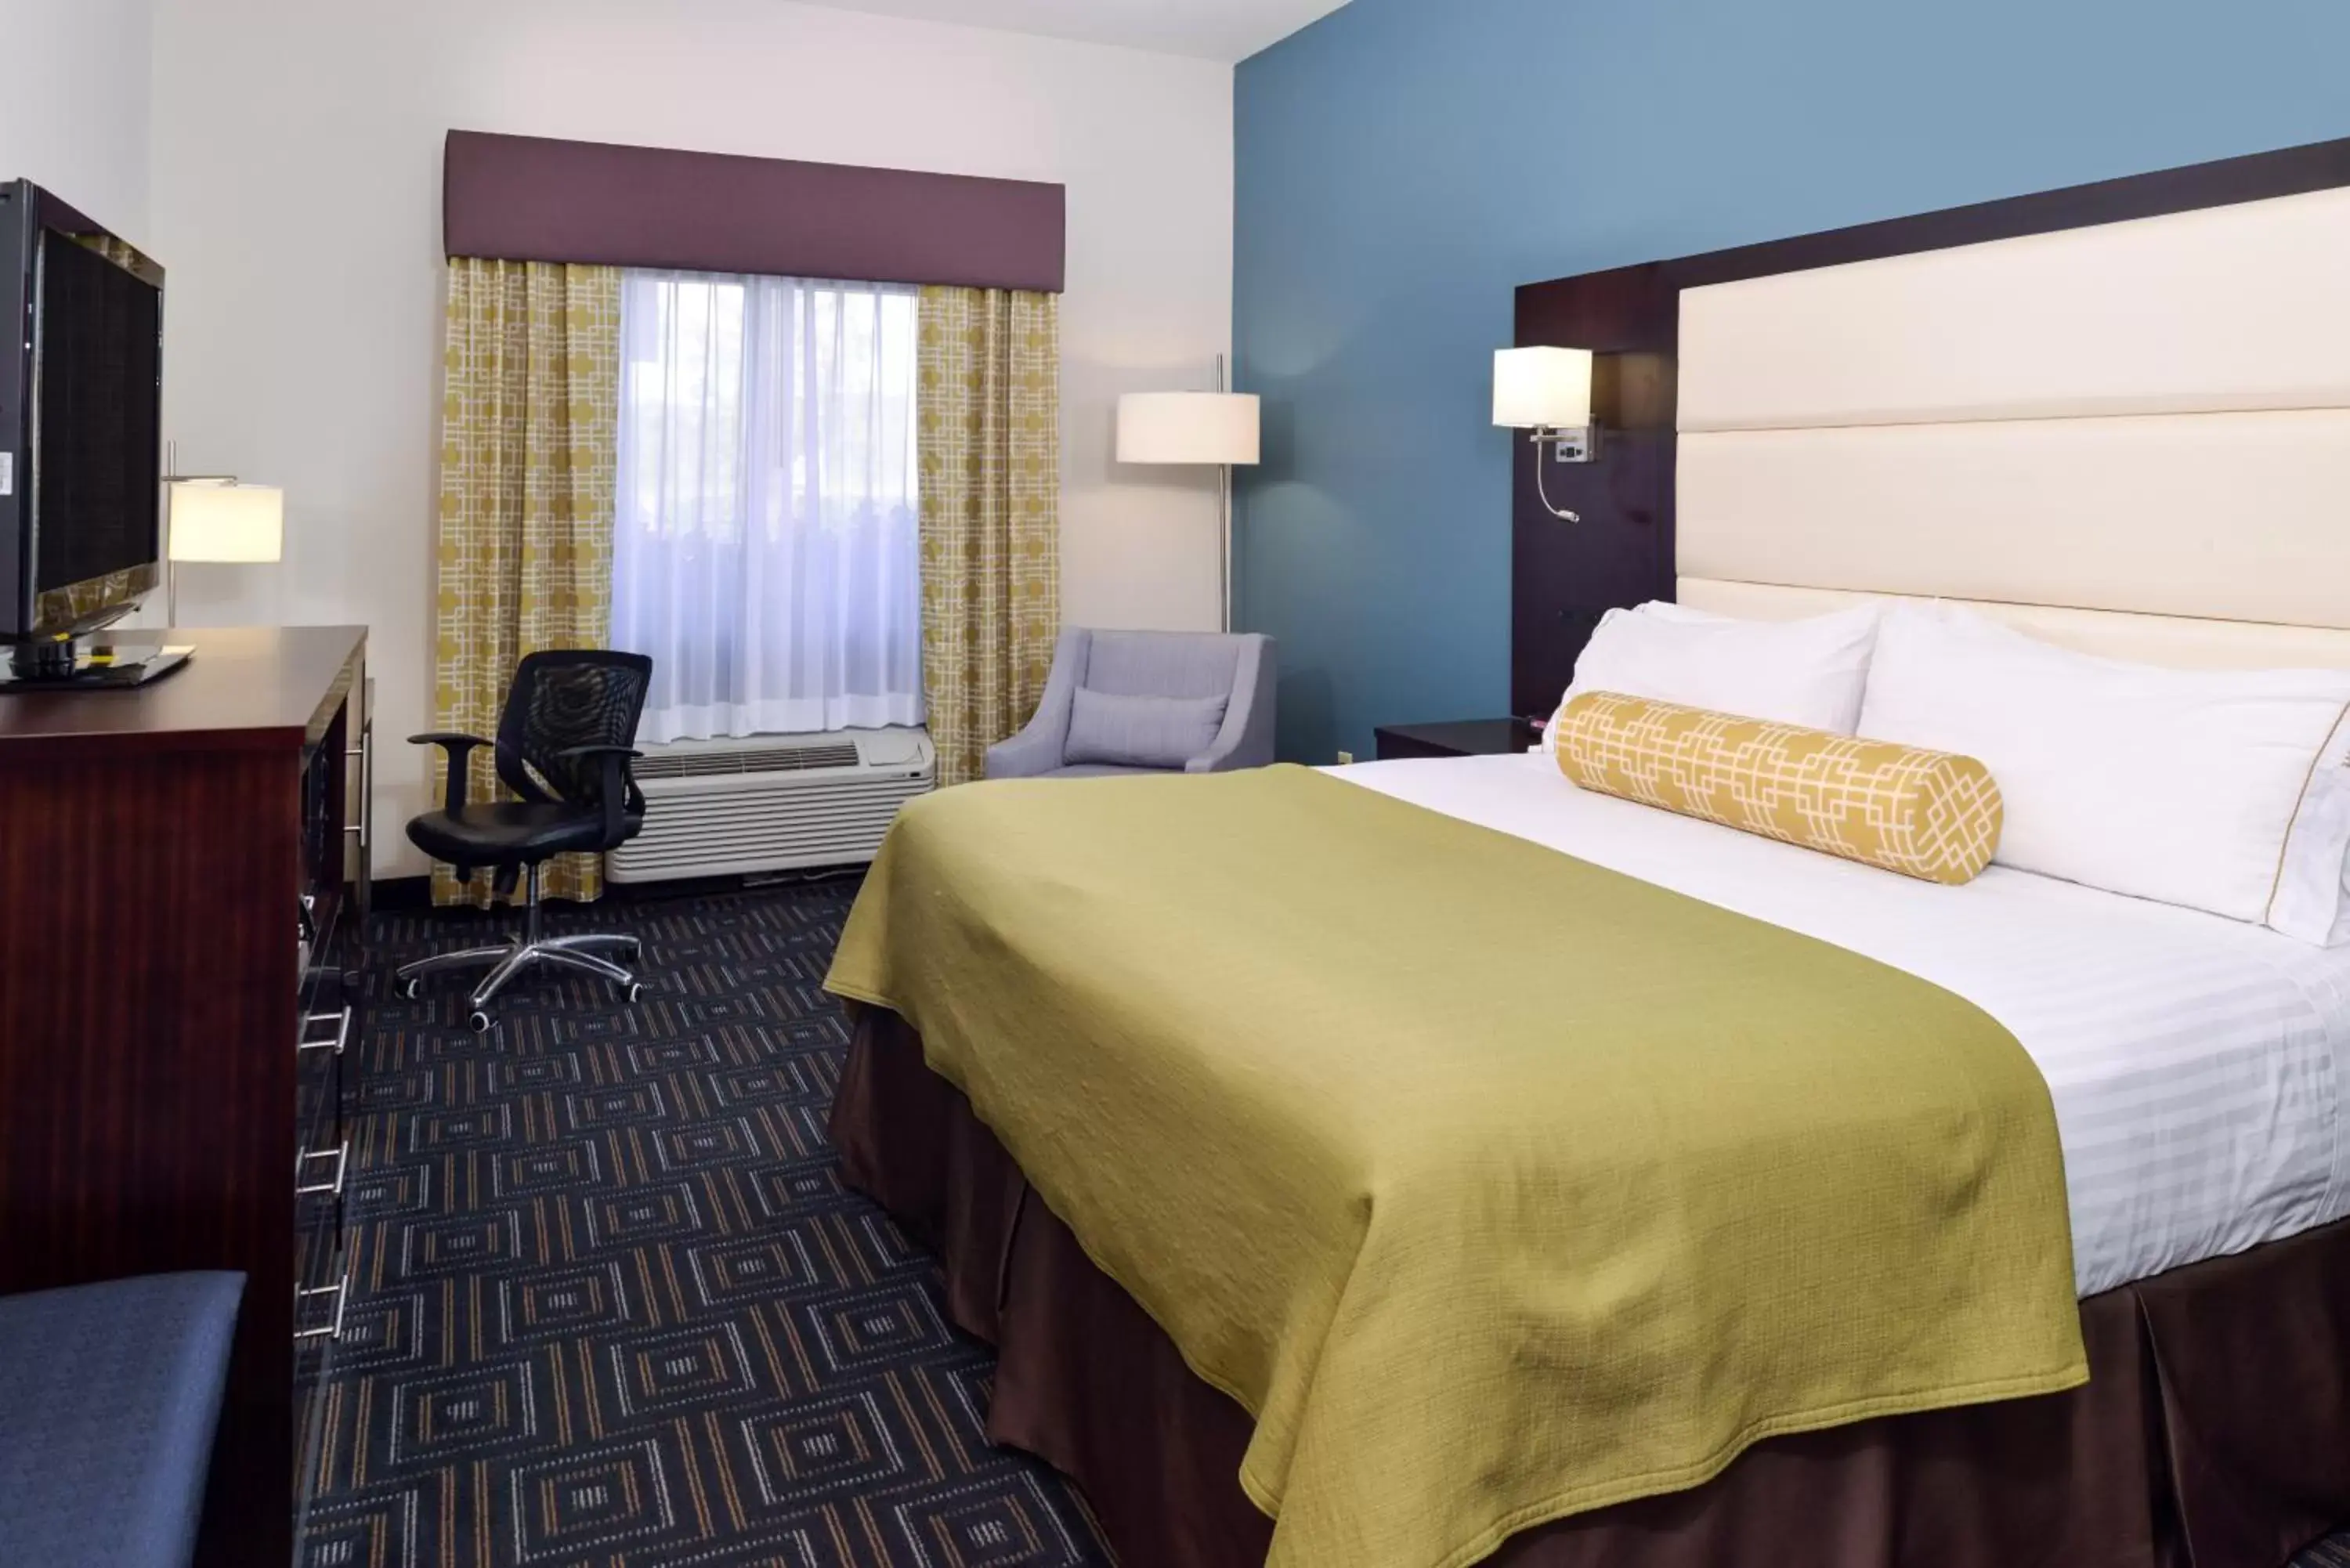 Bed, Room Photo in Holiday Inn Express Hotel & Suites Bessemer, an IHG Hotel